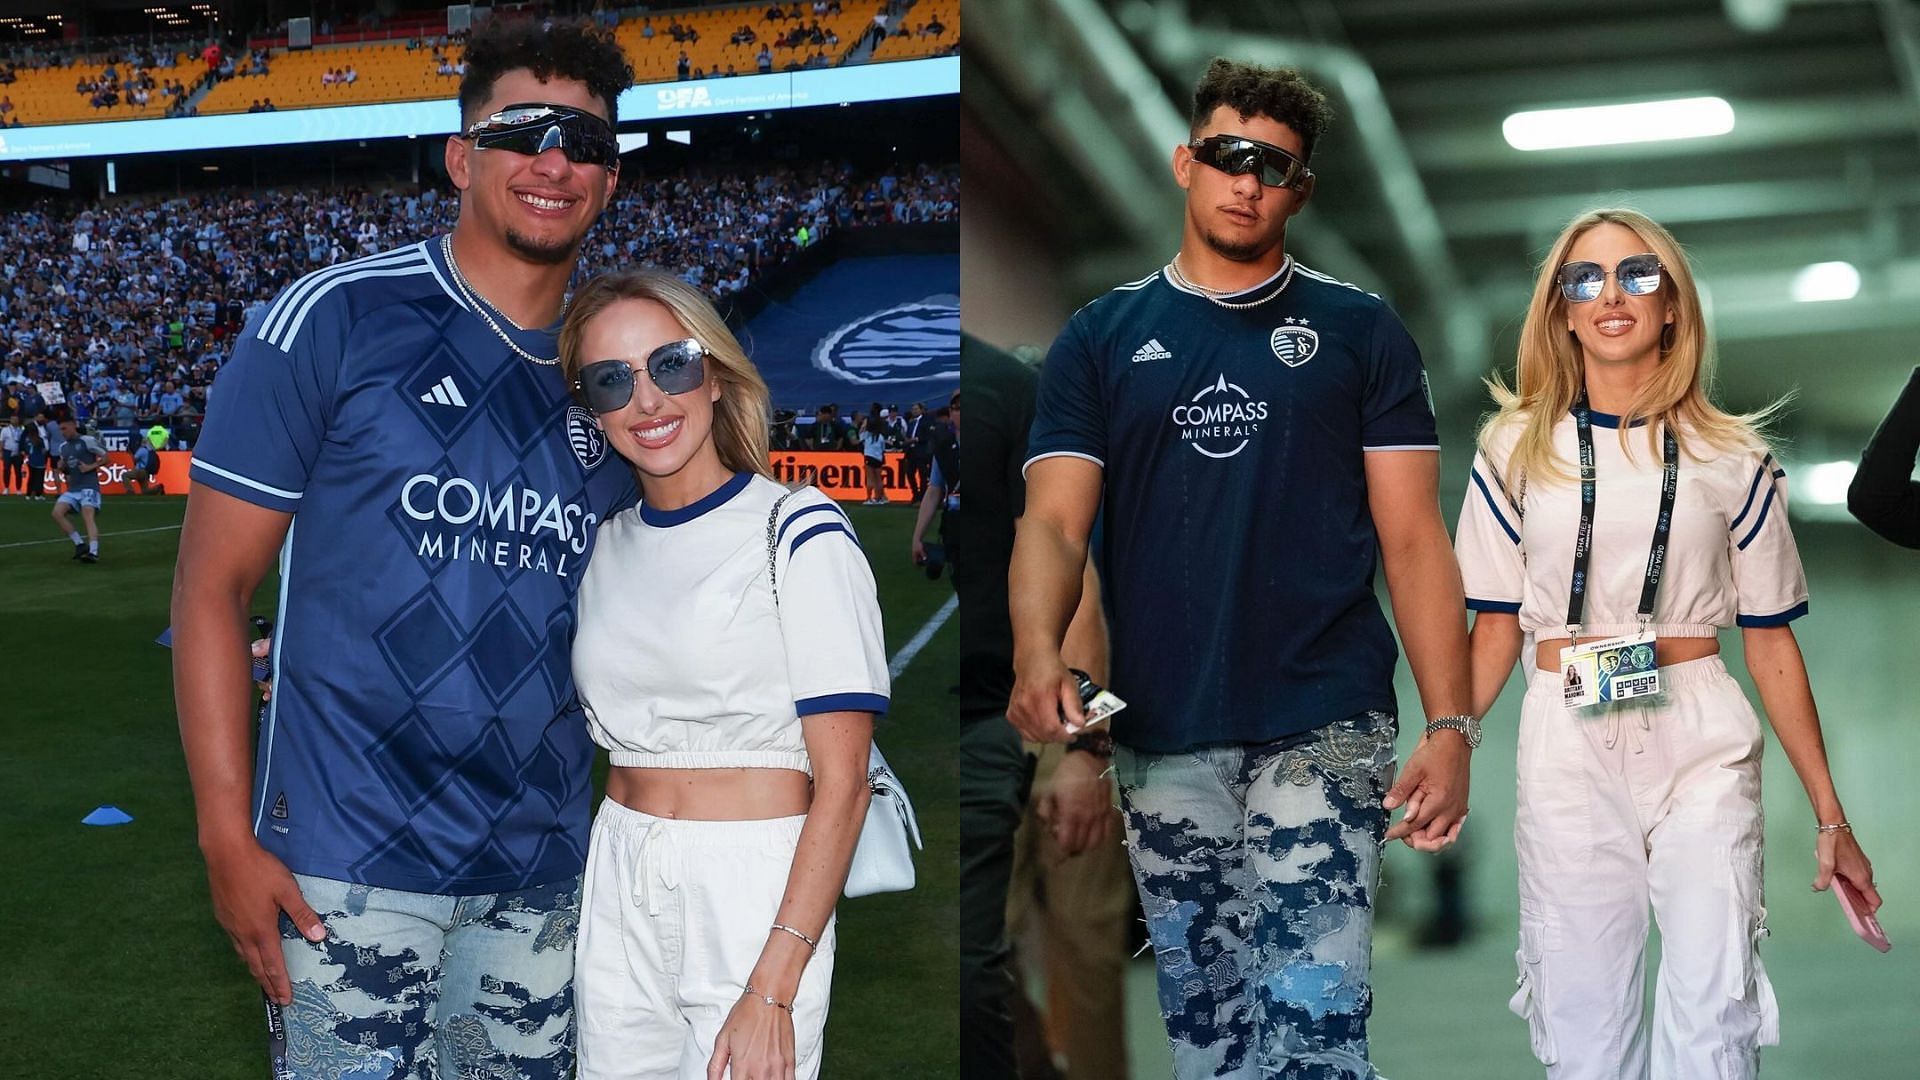 Brittany Mahomes donning blond hair again at a Sporting game